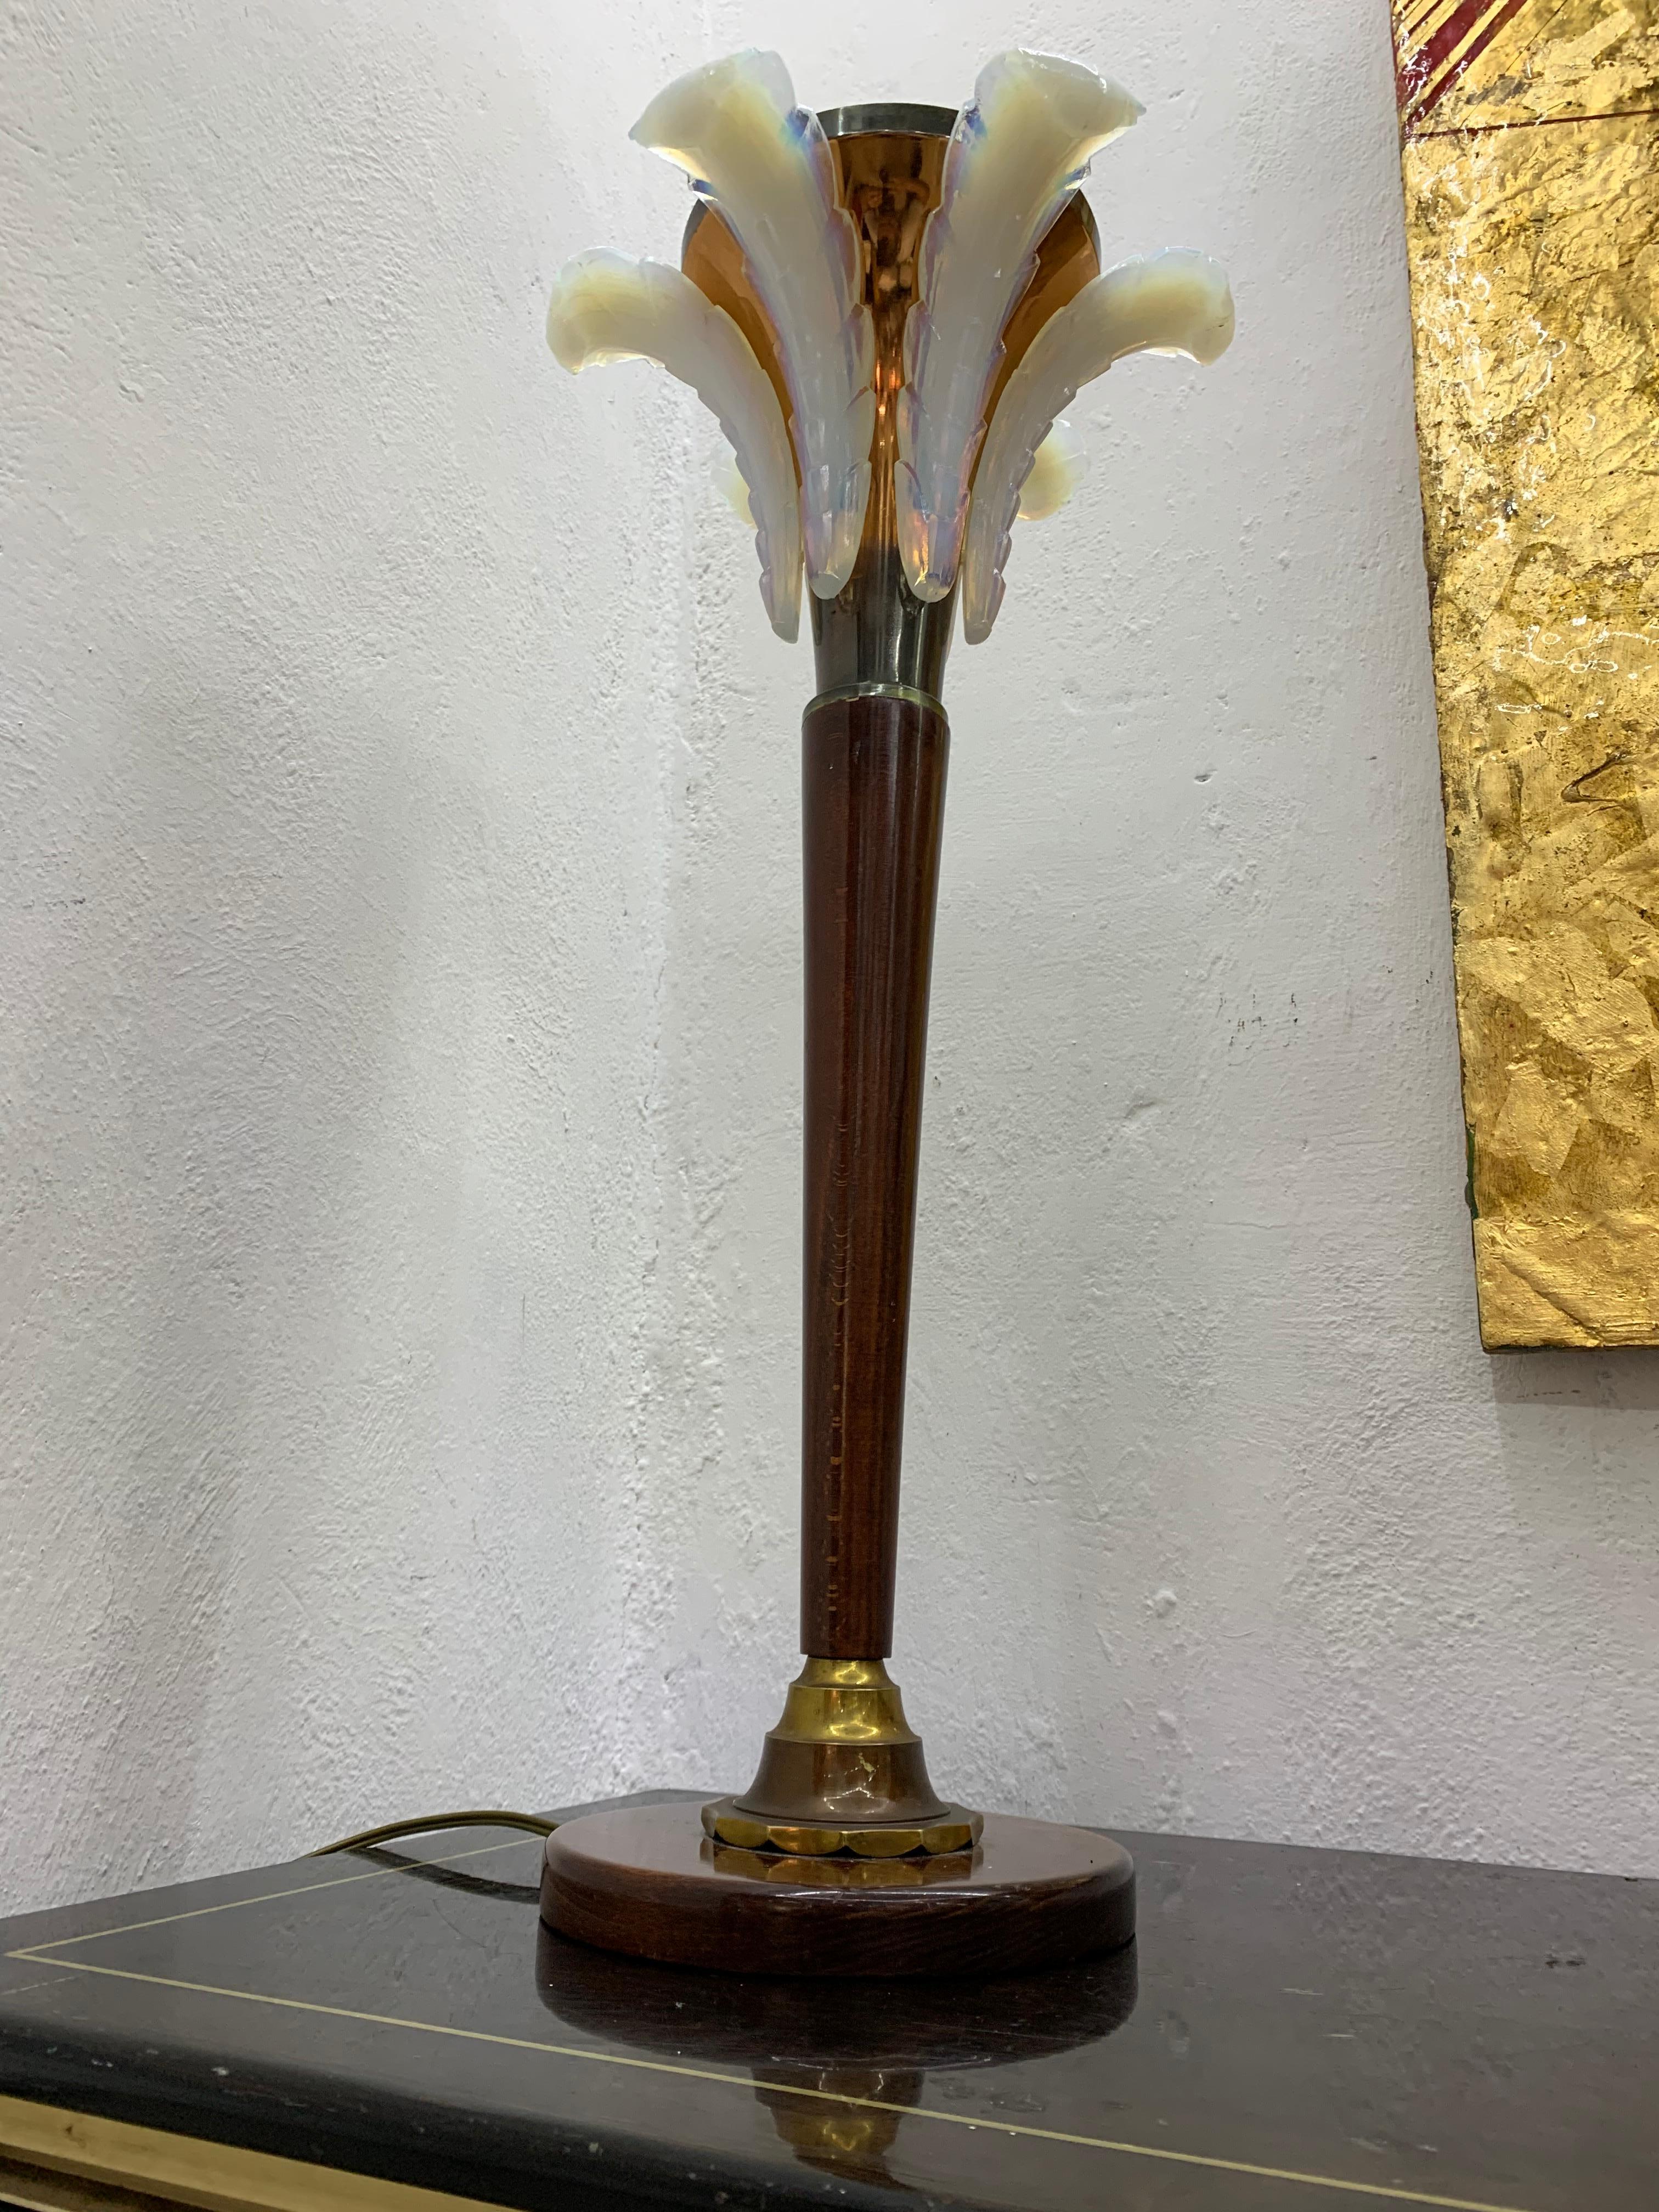 Beautiful Art Deco table lamp attributed to Petitot, glass signed Ezan, France circa 1940s in the shape of a stylized palm tree.
Made in wood copper and blue opalescent pressed glass.